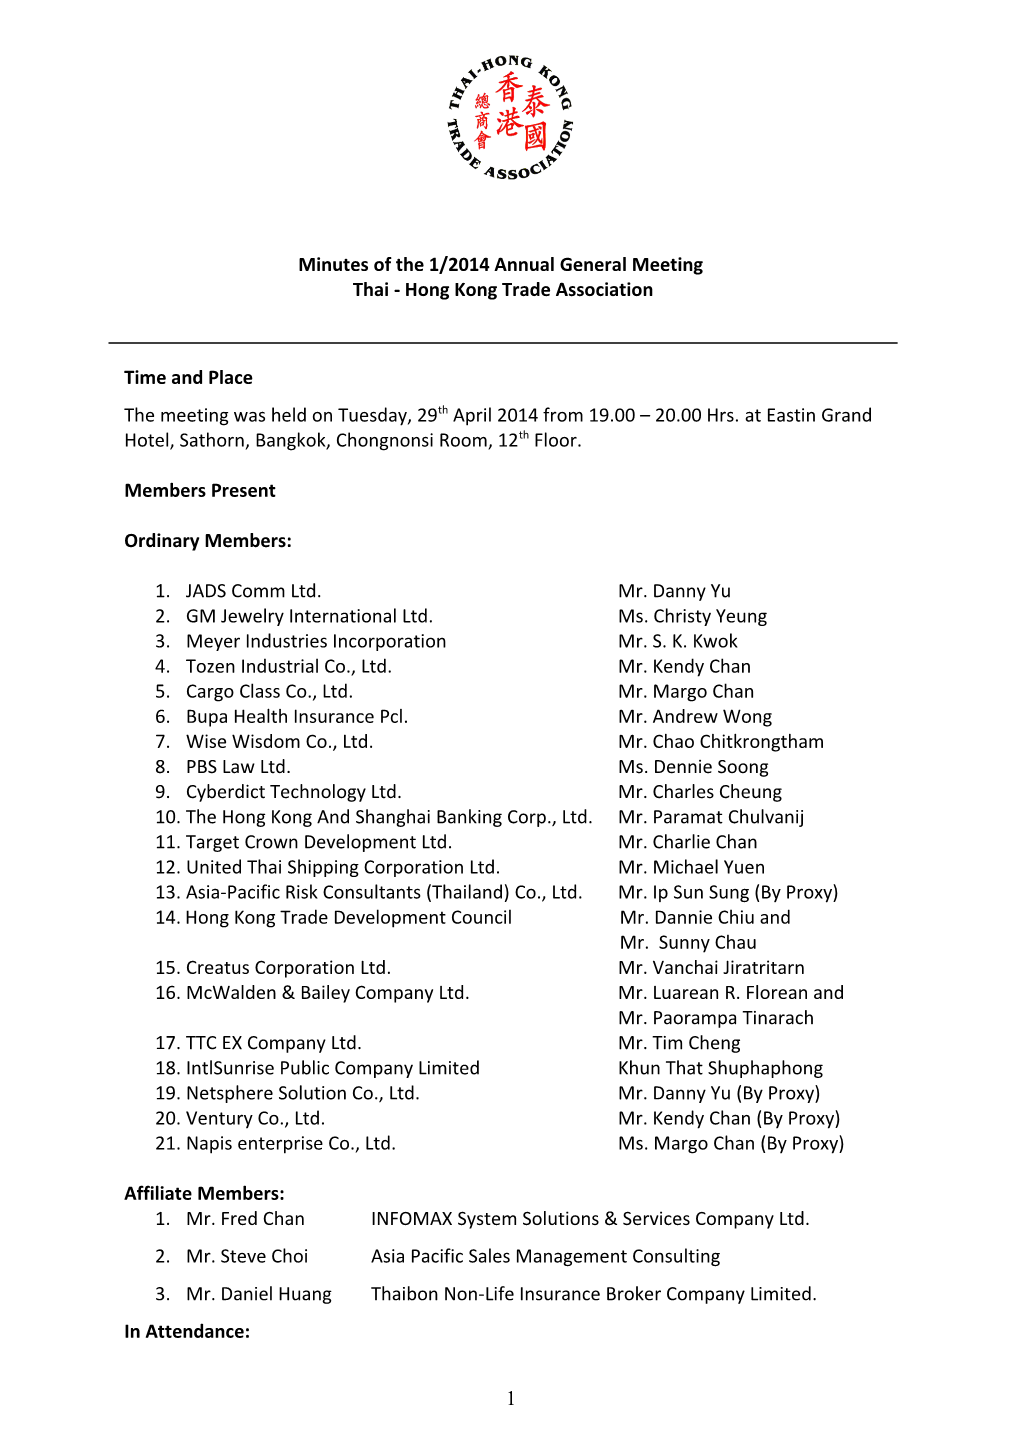 Minutes of the 1/2014 Annual General Meeting